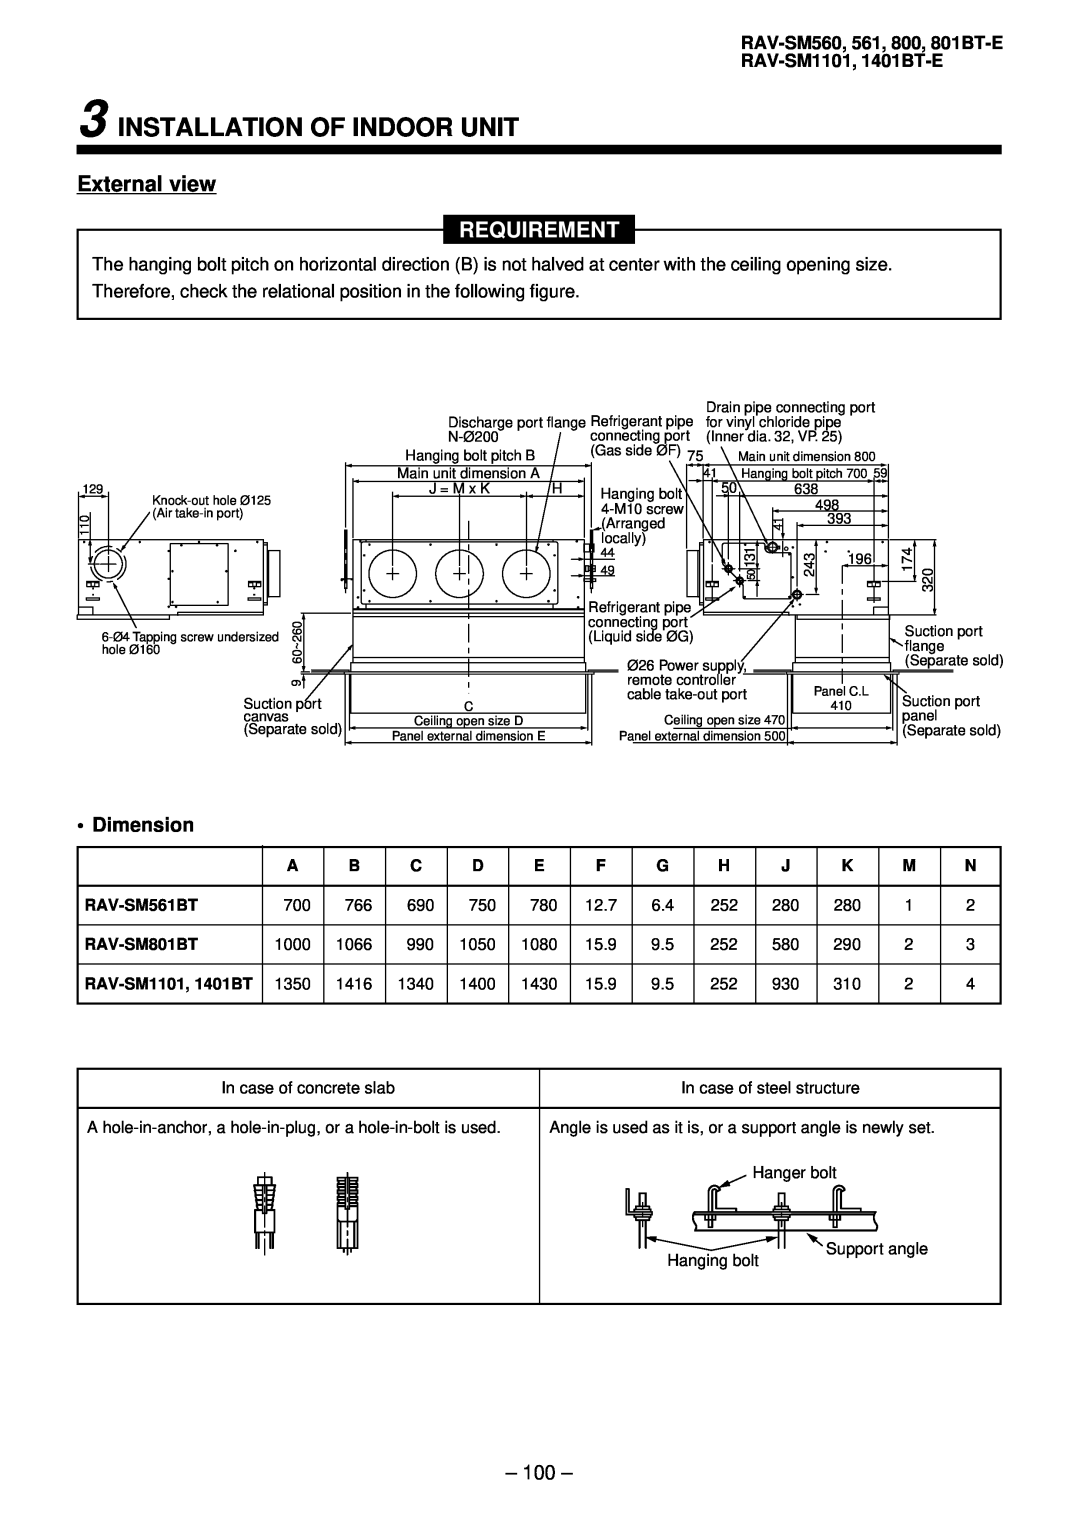 Balcar R410A service manual Installation Of Indoor Unit, External view, Requirement, • Dimension, 100 